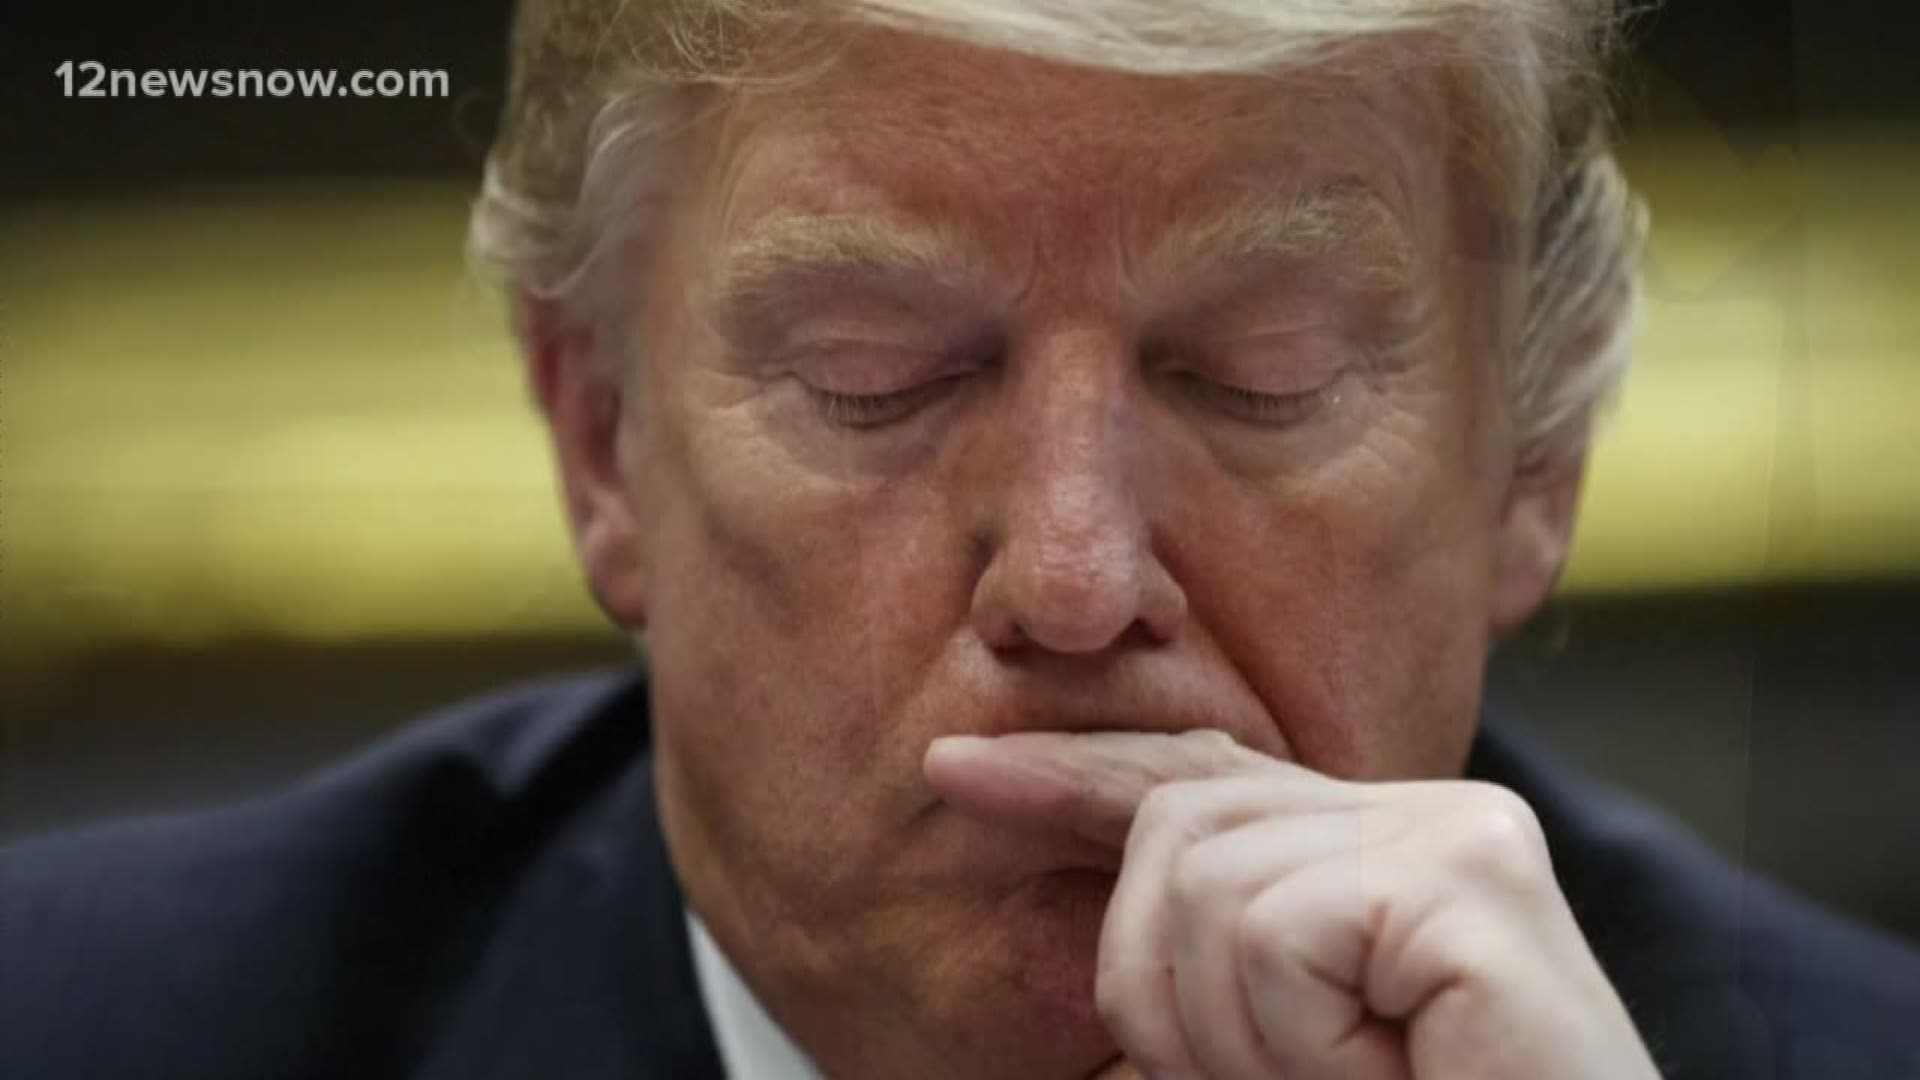 President quickly vows to use veto after Senate votes down emergency declaration